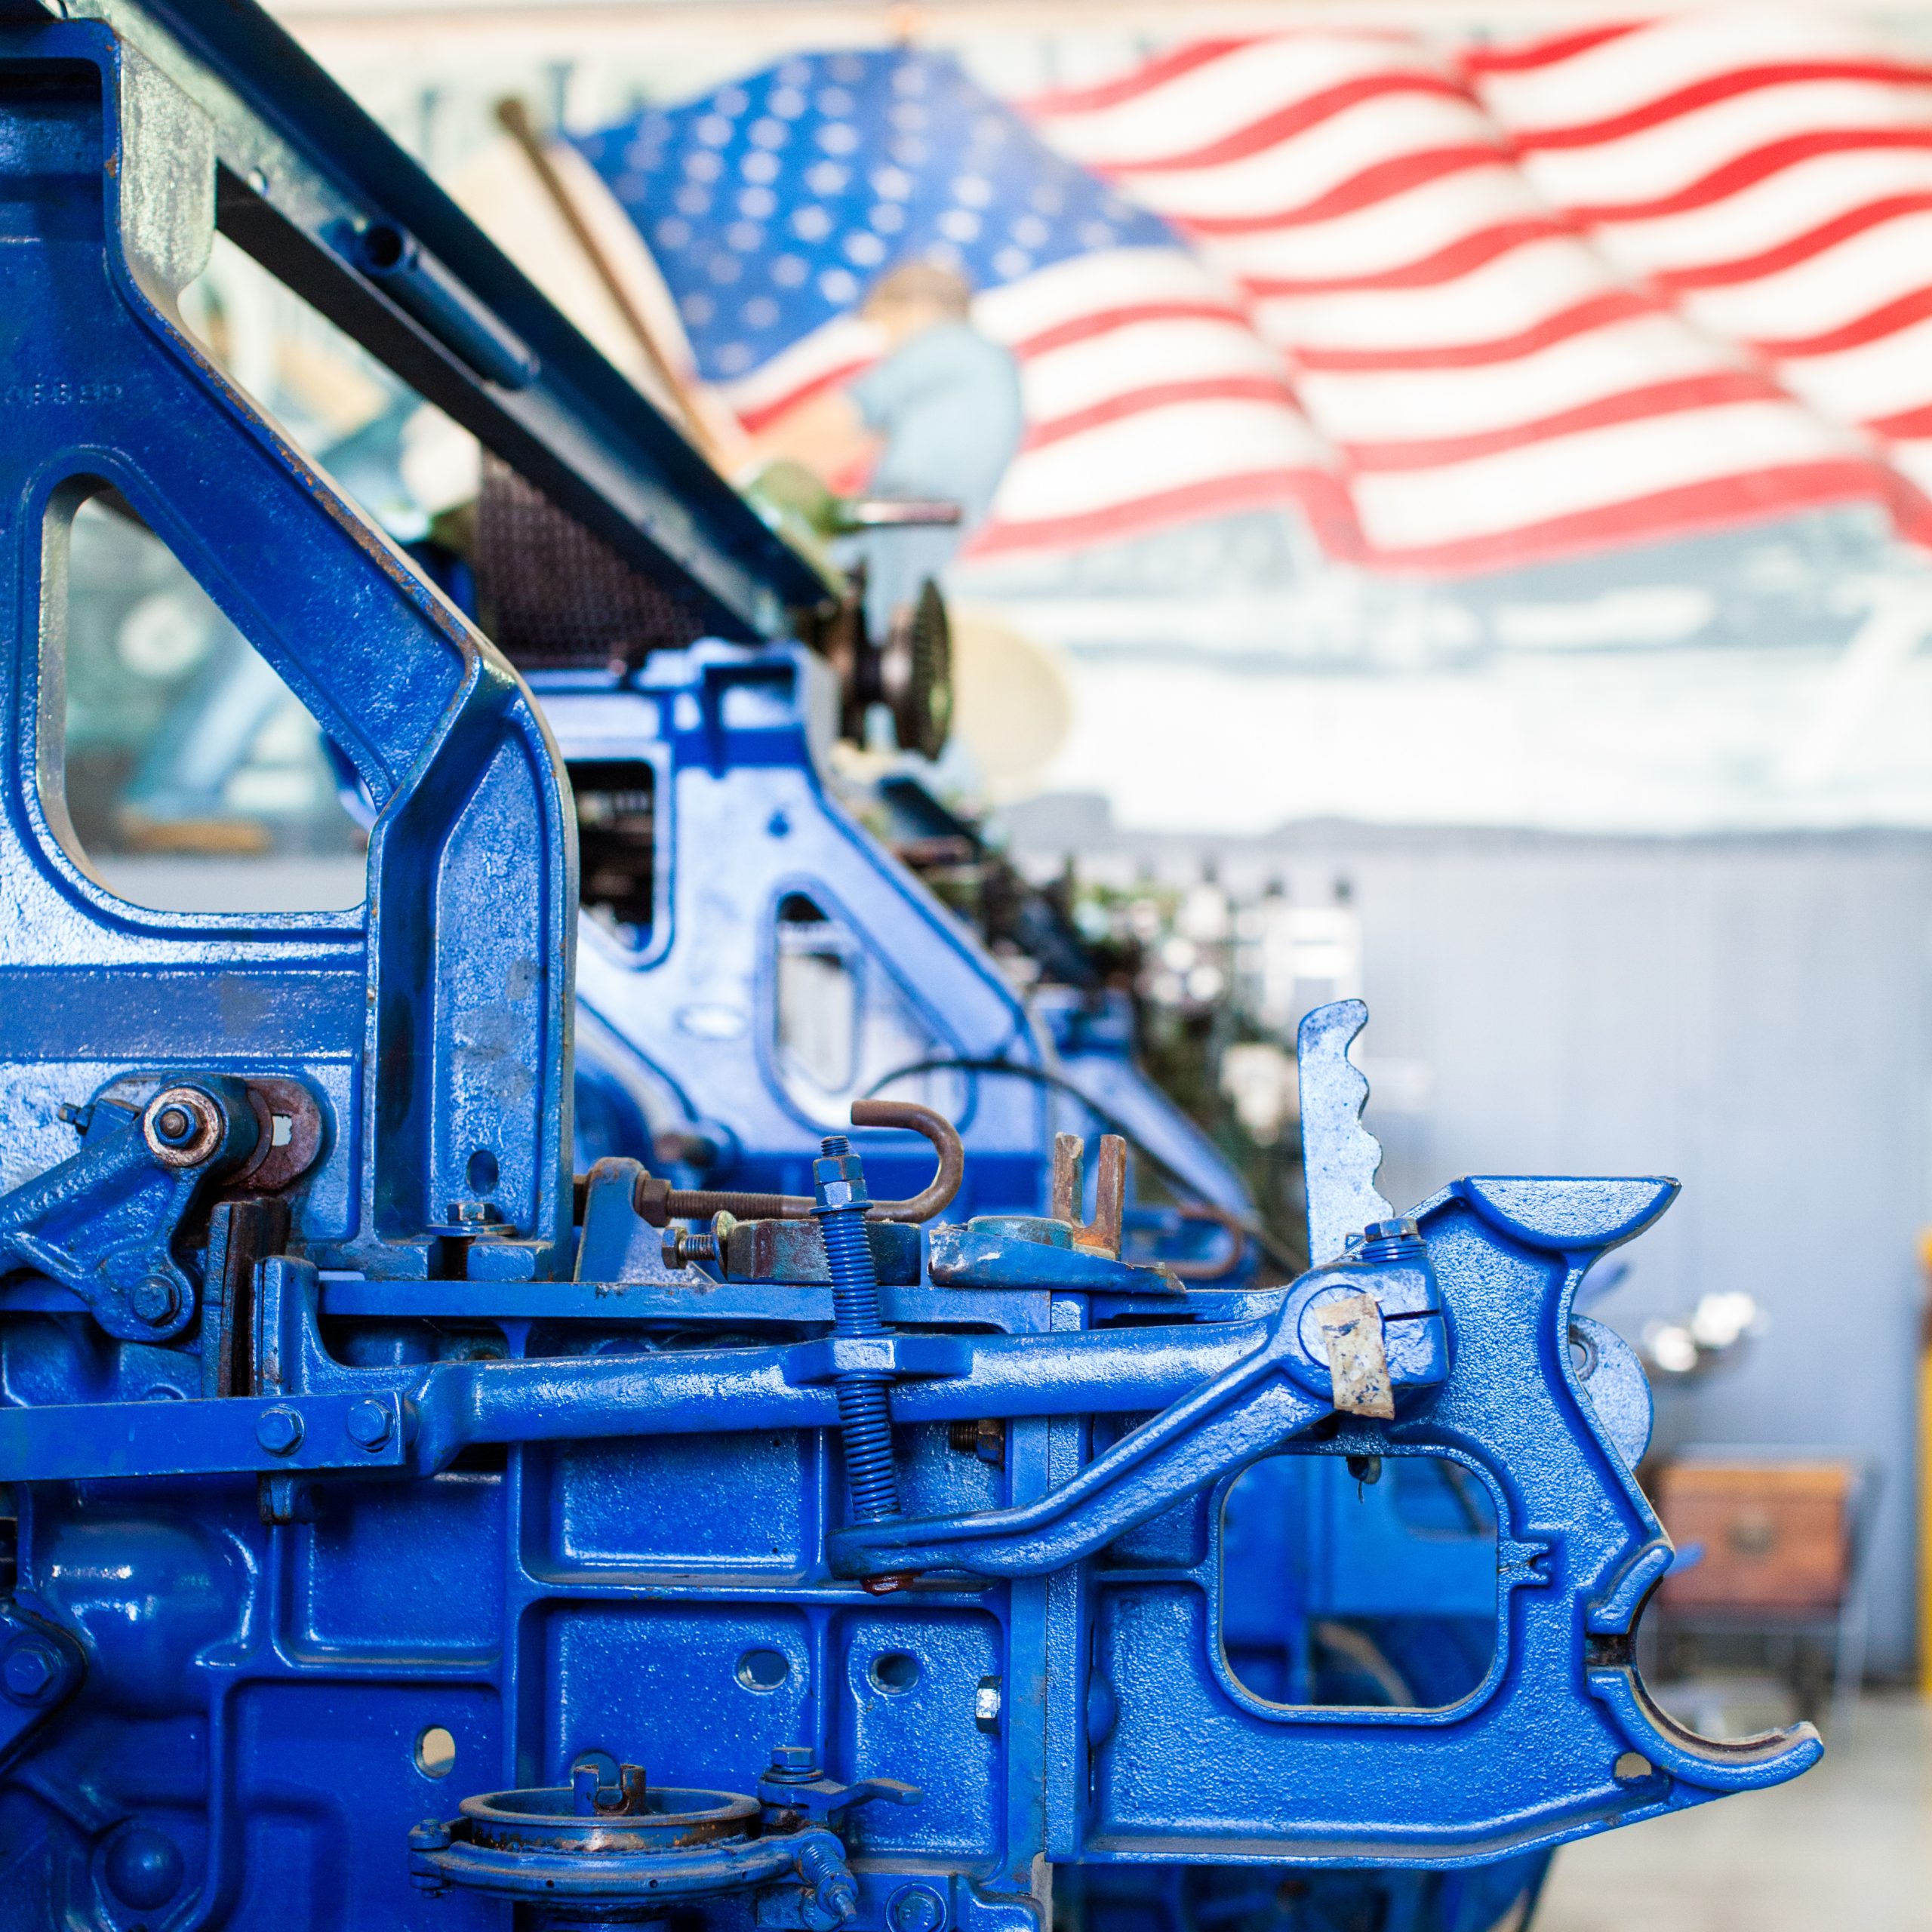 color photograph with vivid blue Toyoda industrial loom in forefront and american flag worker mural in background